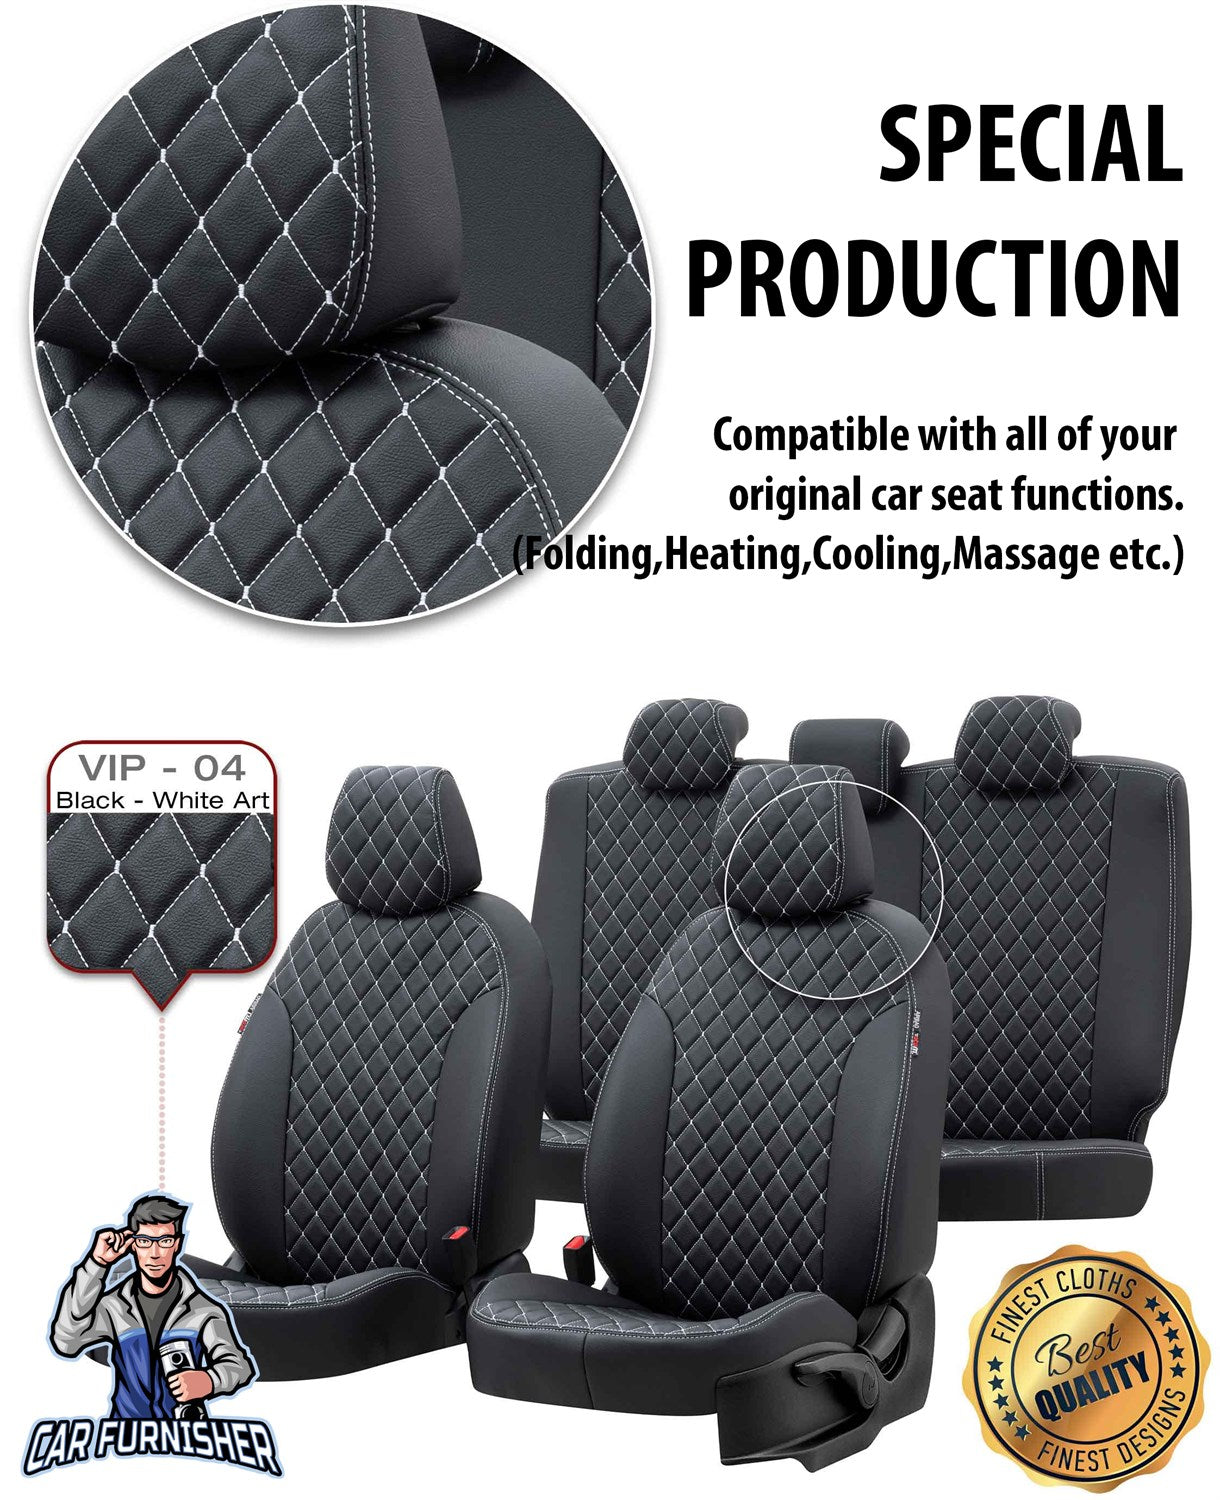 Toyota Proace City Seat Covers Madrid Leather Design Blue Leather